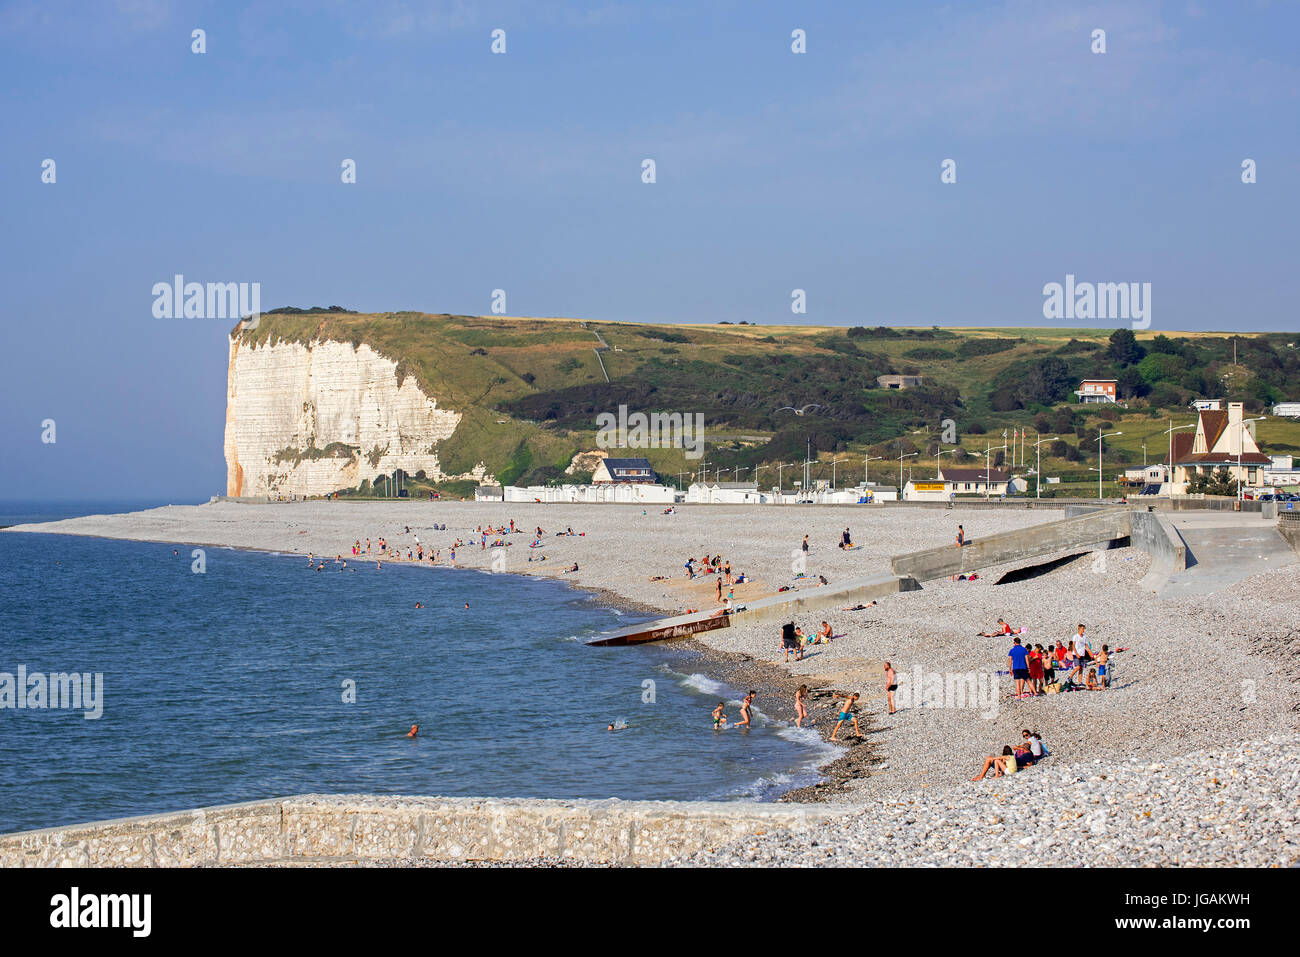 White chalk cliffs and sunbathers on pebble beach at Veulettes-sur-Mer, Seine-Maritime, Normandy, France Stock Photo